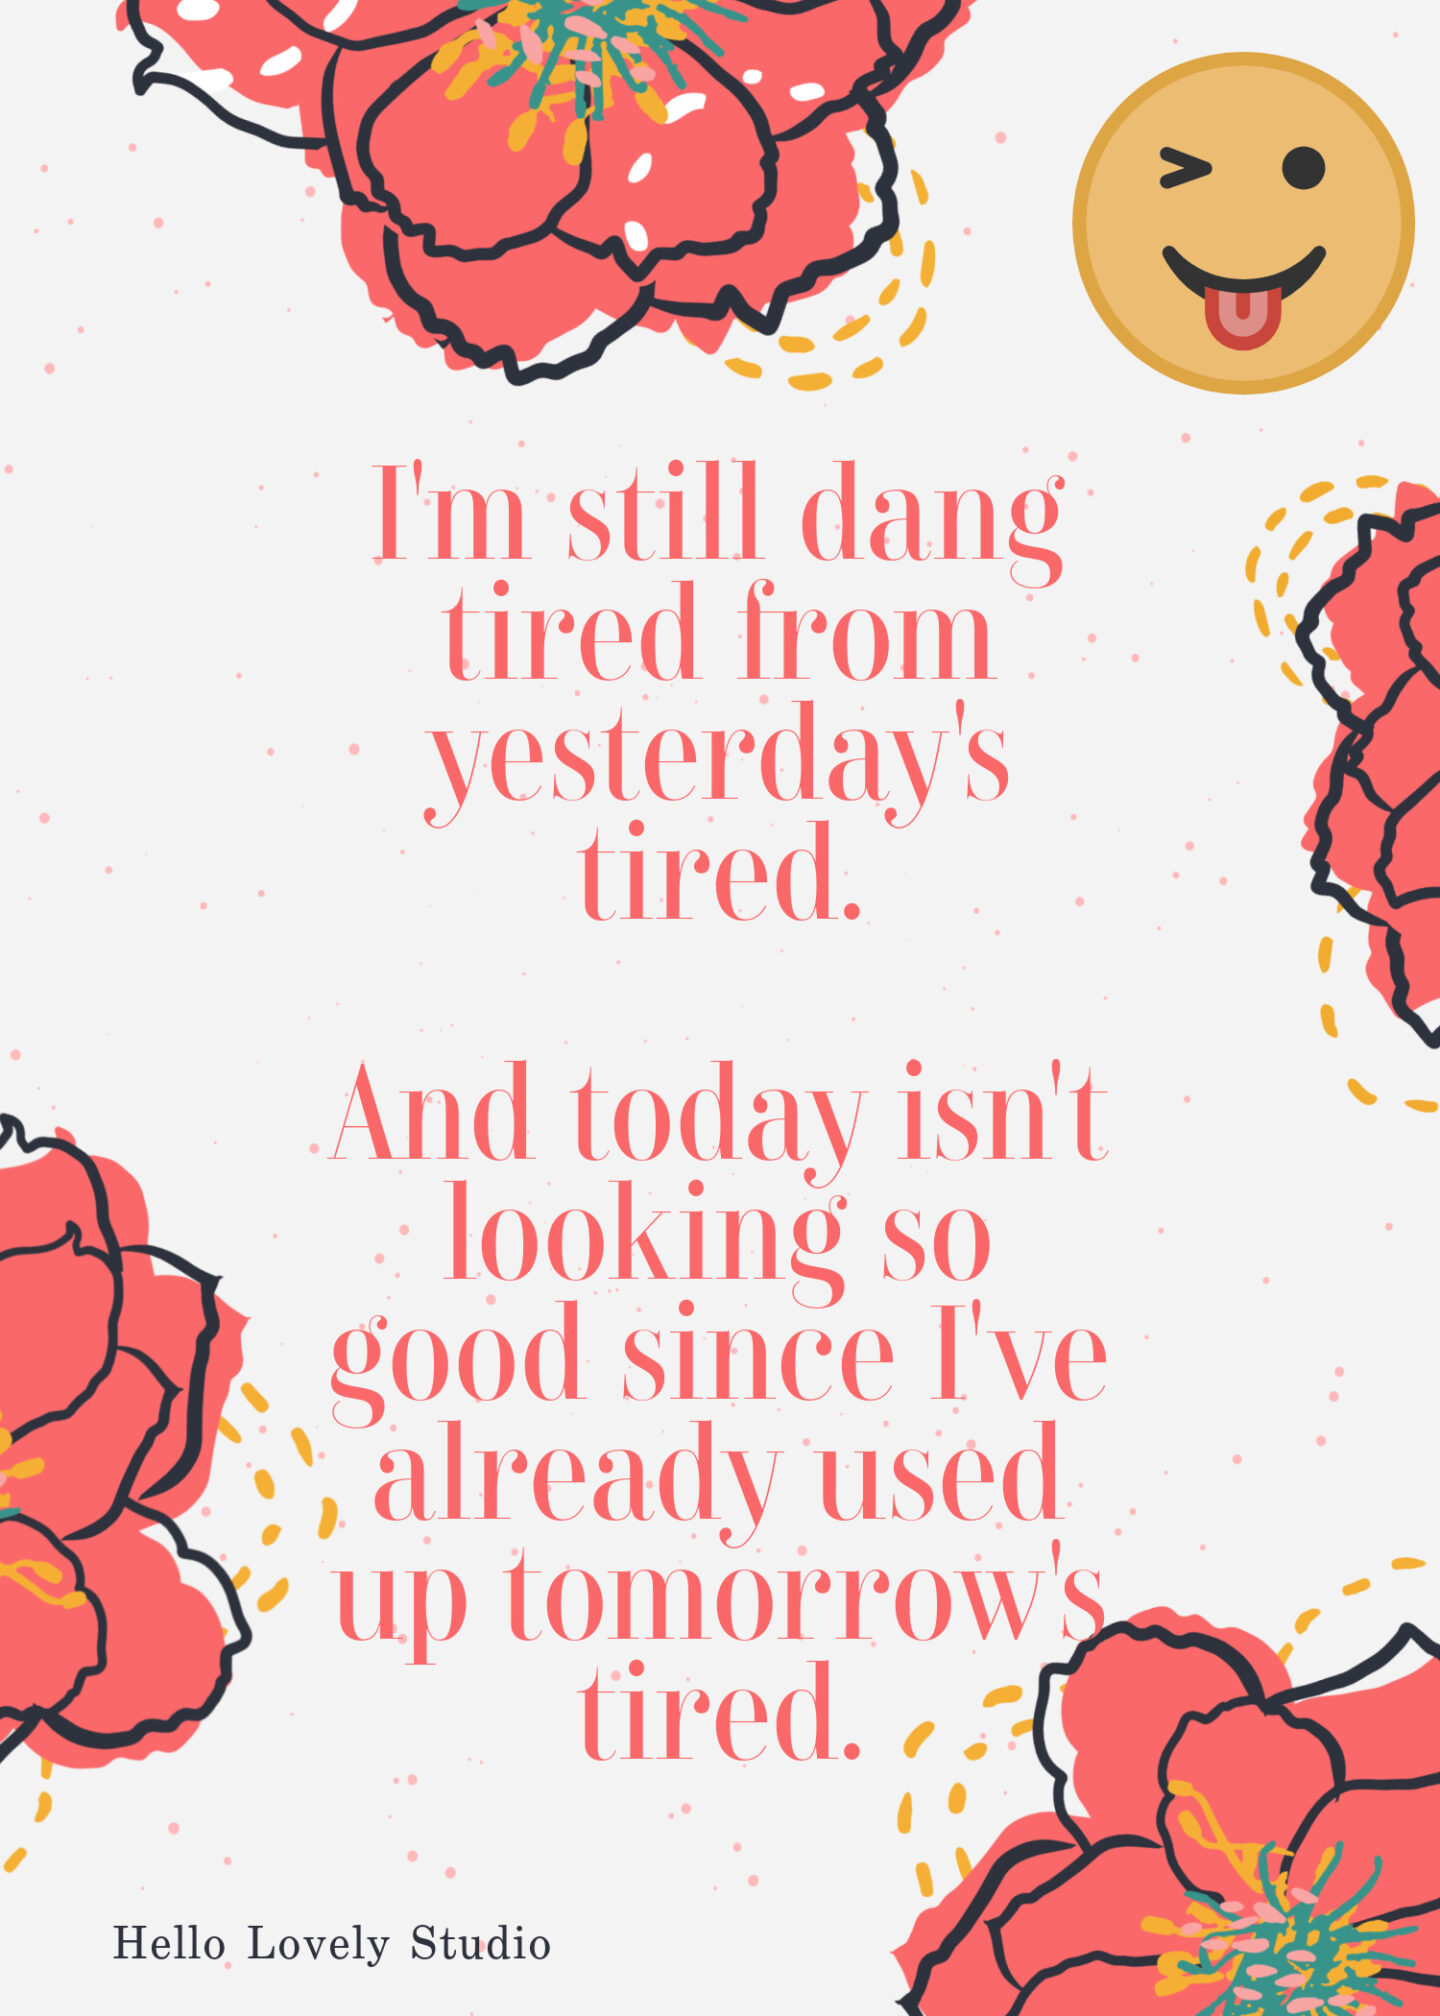 Funny menopause humor and whimsical quote about being tired - Hello Lovely Studio. #menopausehumor #tiredquote #funnyquotes